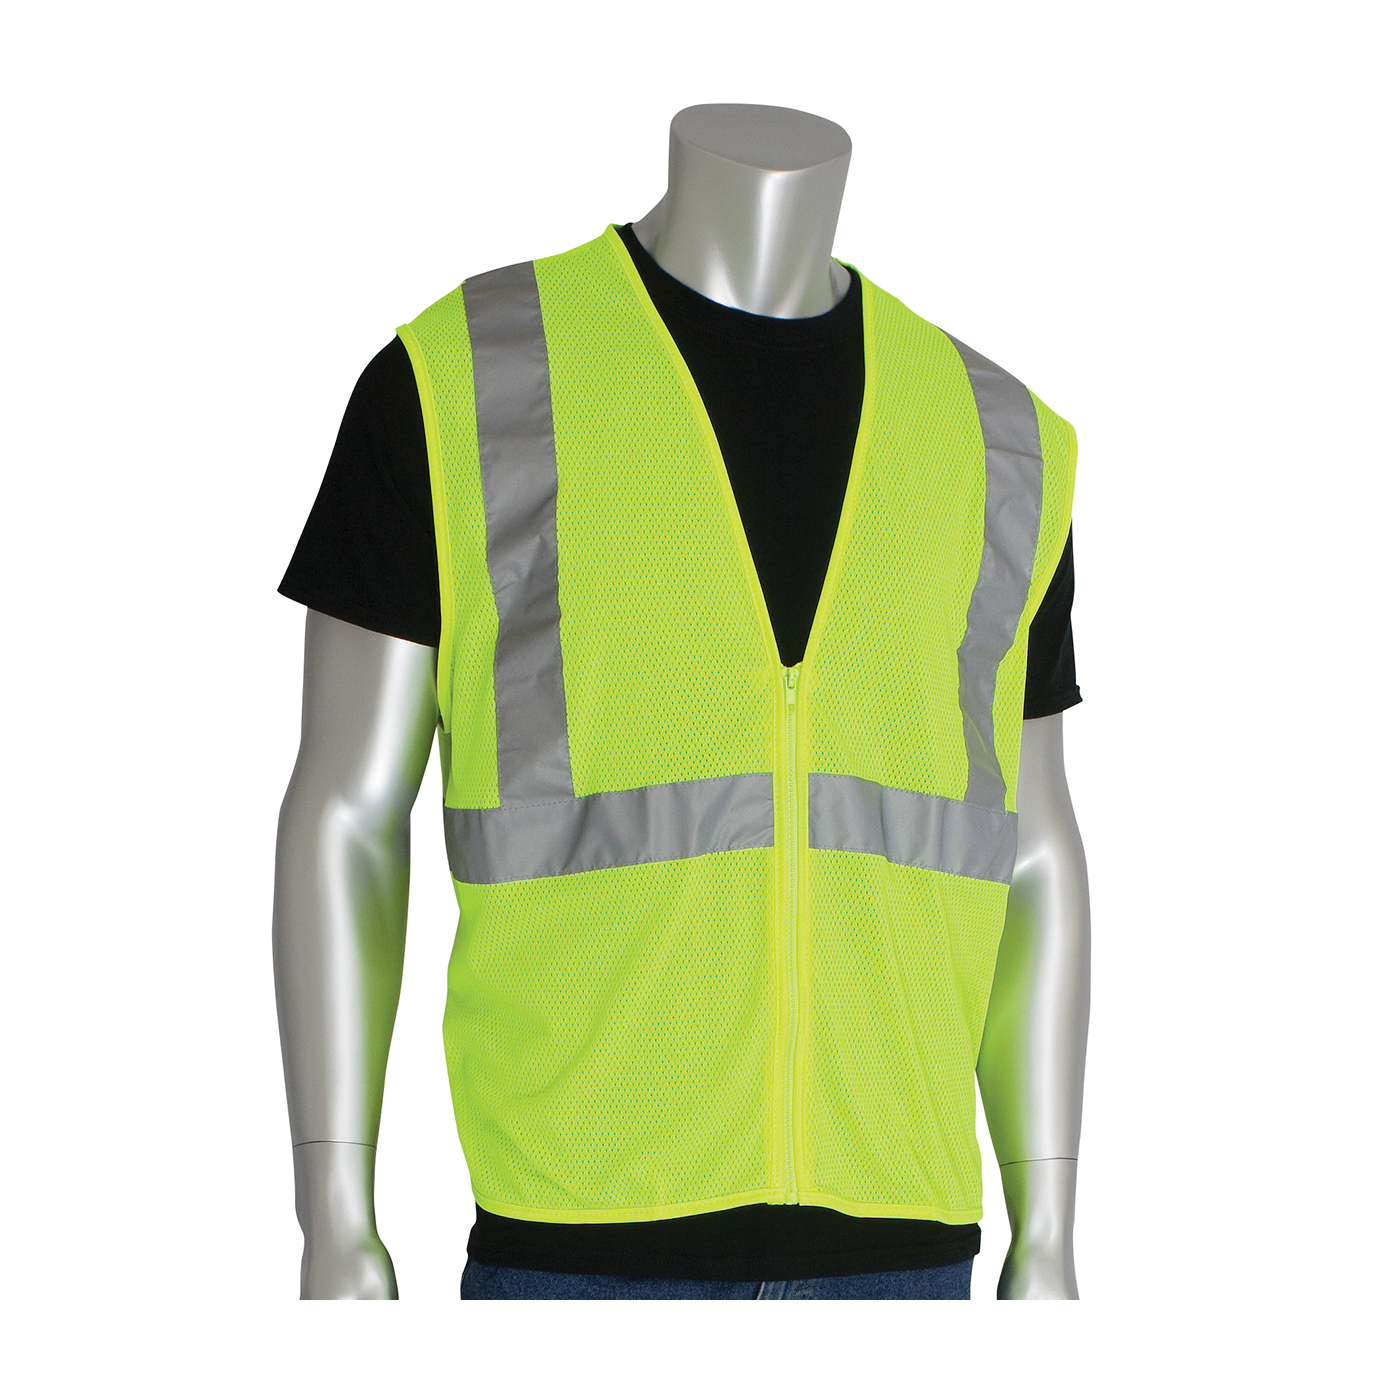 PIP® 302-MVGZLY-4X Safety Vest, 4XL, Hi-Viz Lime Yellow, Polyester Mesh, Zipper Closure, ANSI Class: Class 2, Specifications Met: ANSI 107 Type R